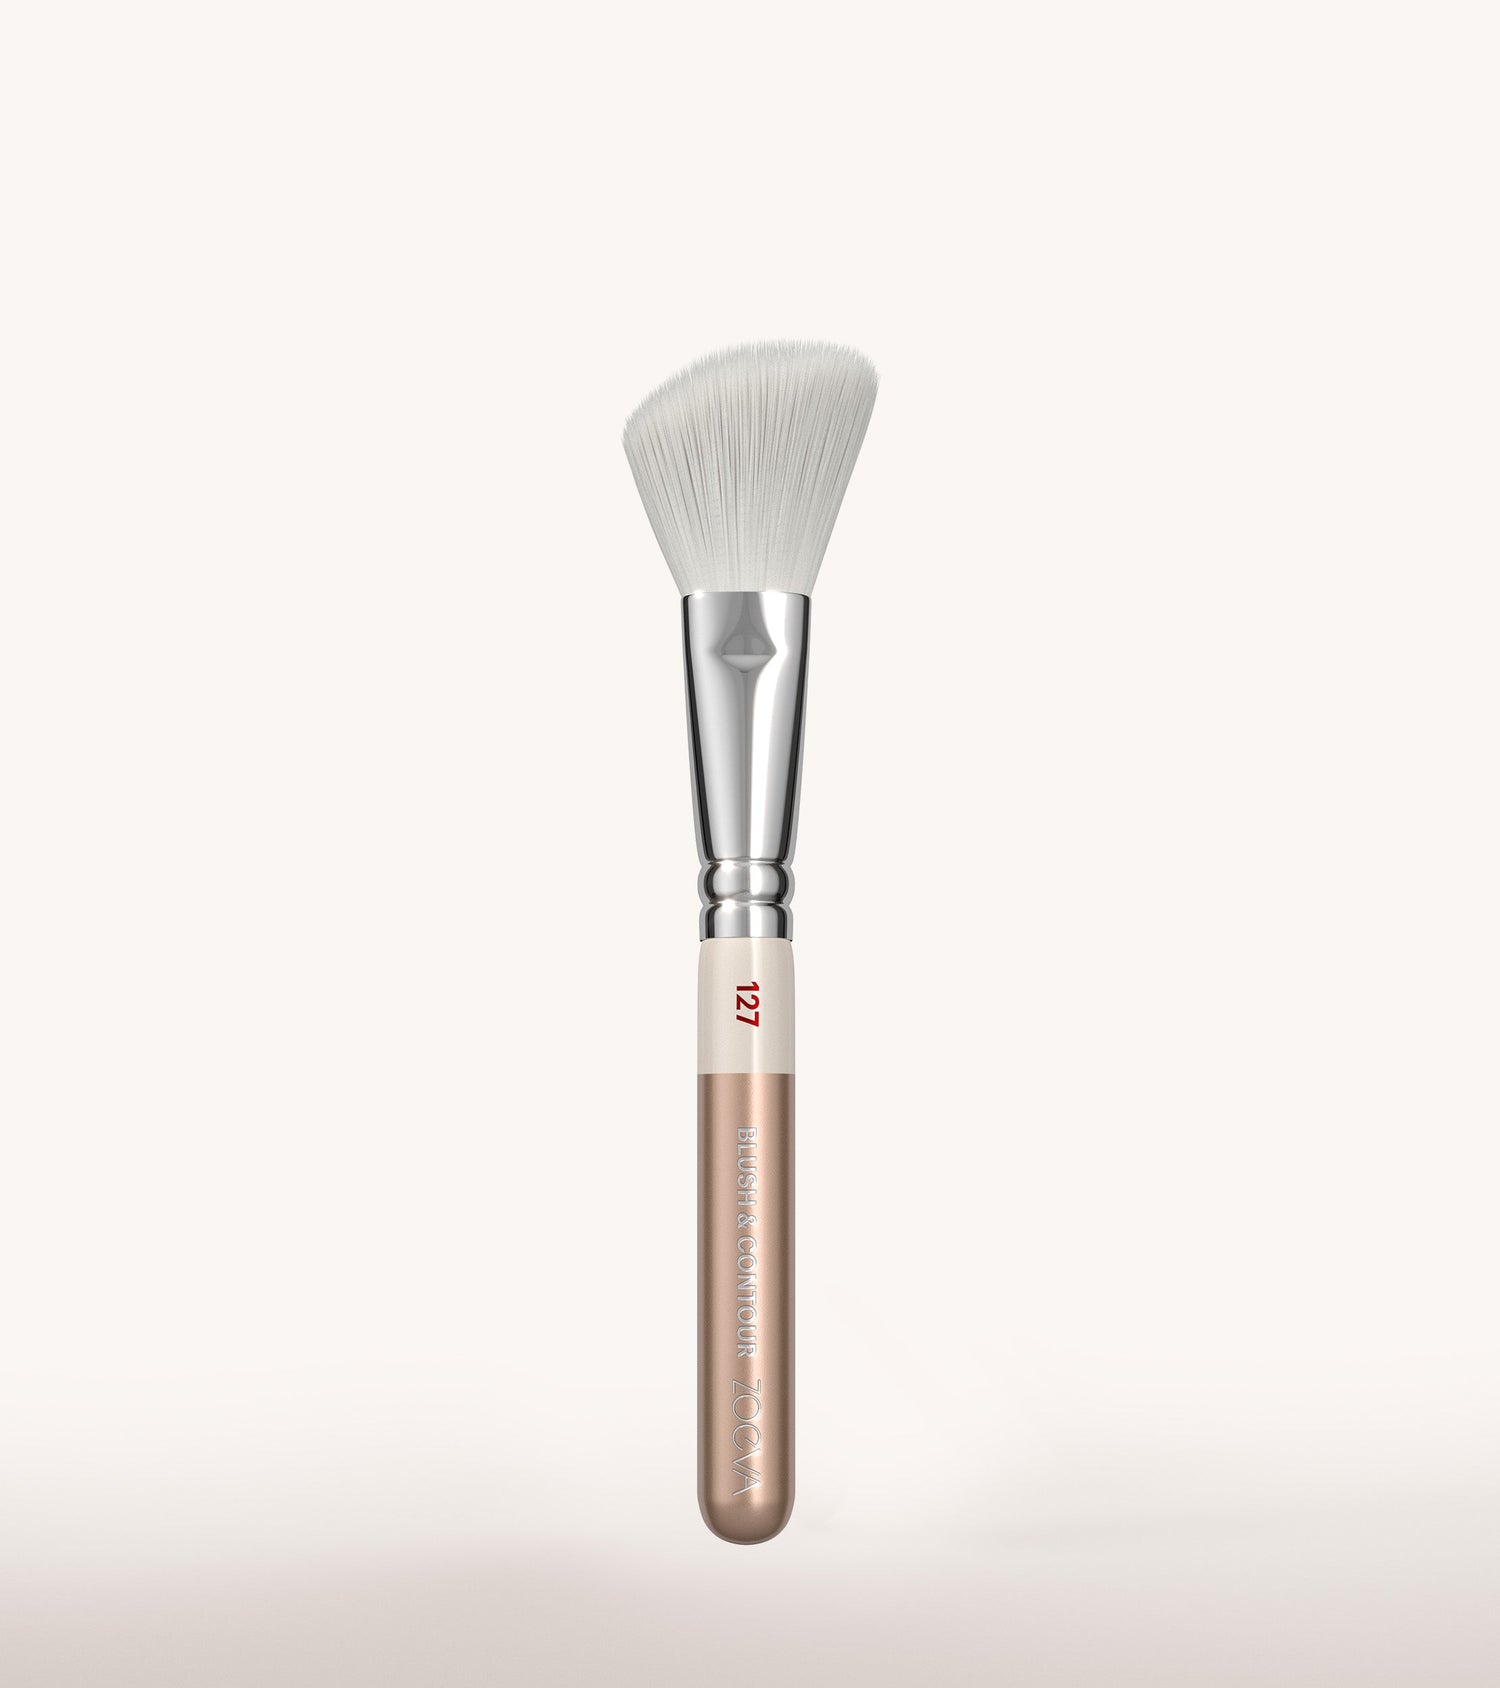 Angled blush brush - contour and shape your face